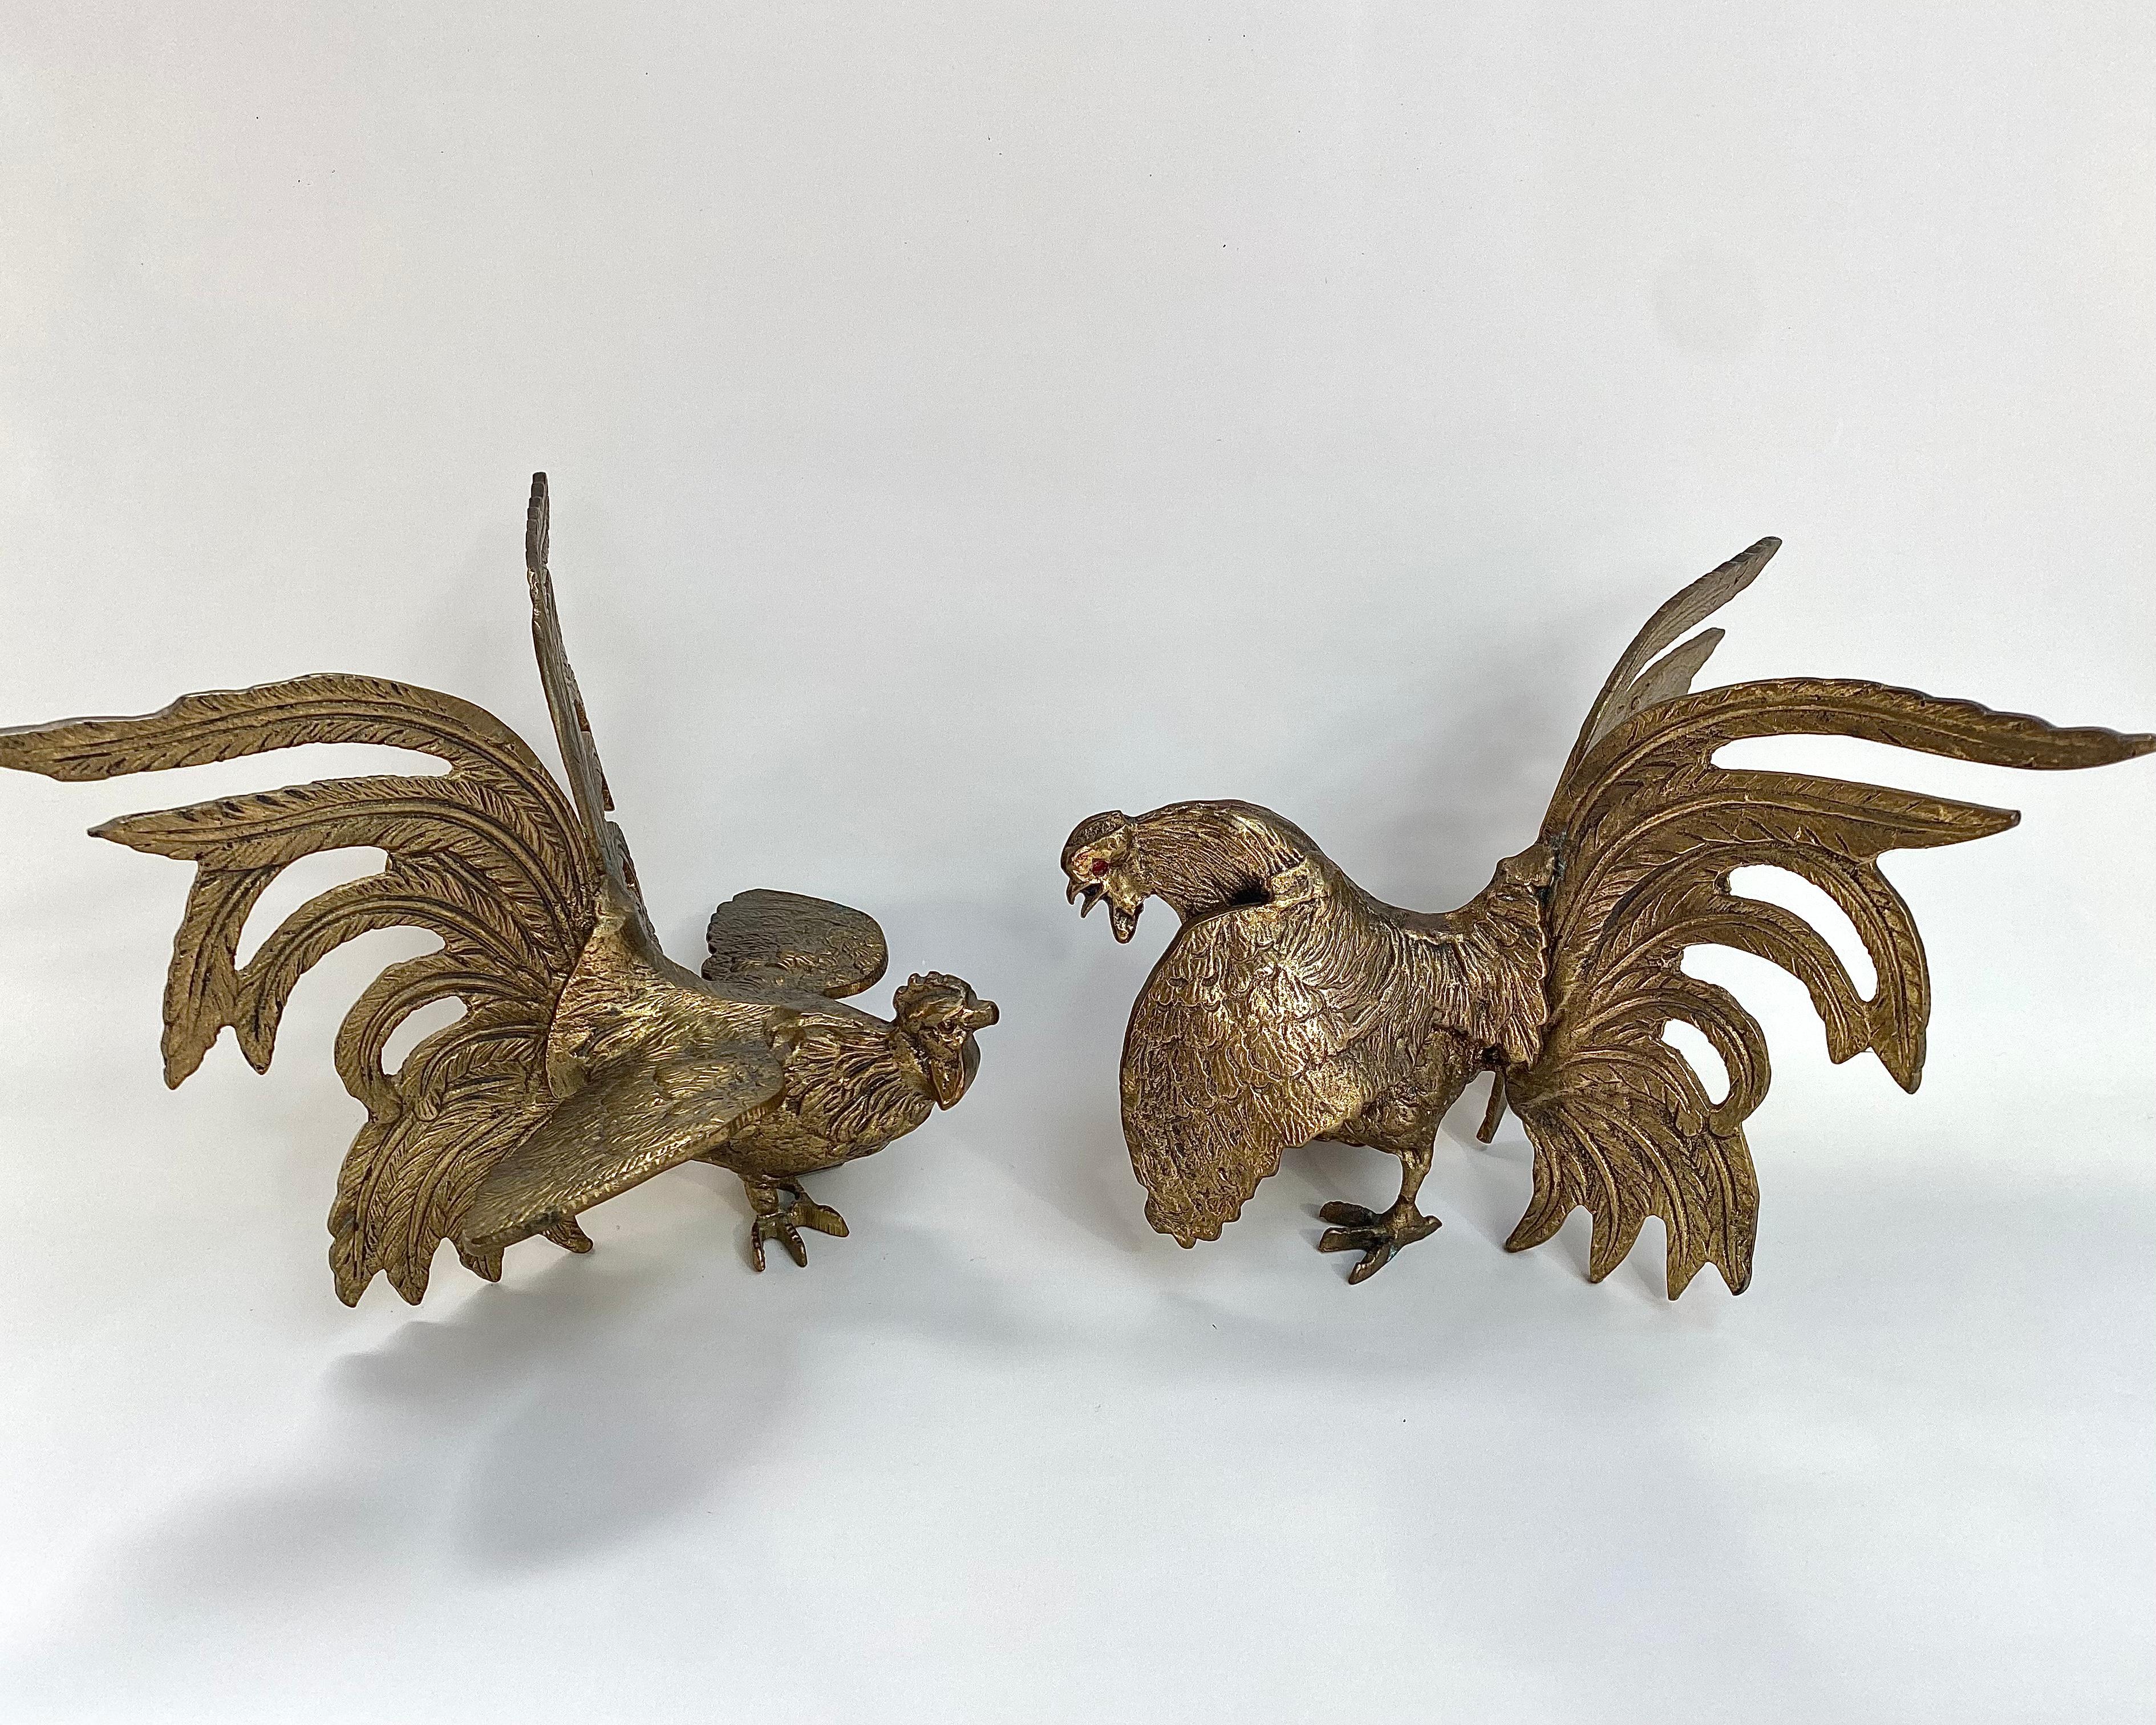 Mid-20th Century Vintage Bronze Rooster Statuette, Cocks Fights Set 2, France, 1960s For Sale